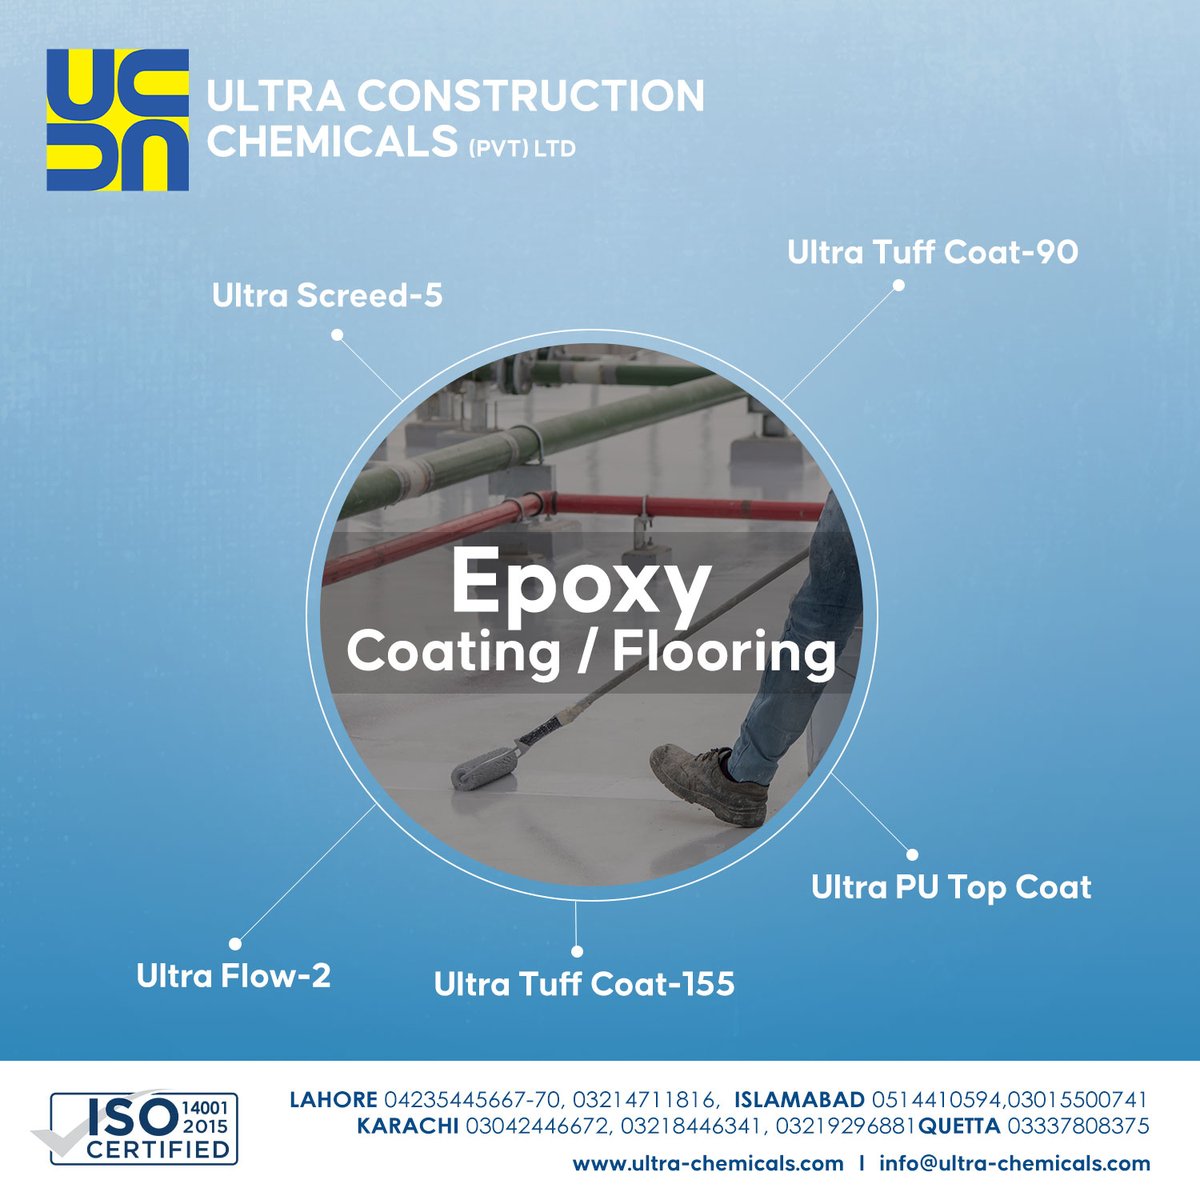 Ultra Construction Chemicals introduces its premium Epoxy Coating solutions in Pakistan, setting a new standard for durability.
☎️ : 04235445668
📱 : 03214711816
🌐 : ultra-chemicals.com
#ConstructionChemicals #EpoxyCoating #ConstructionPakistan #Durability #ProtectiveCoating